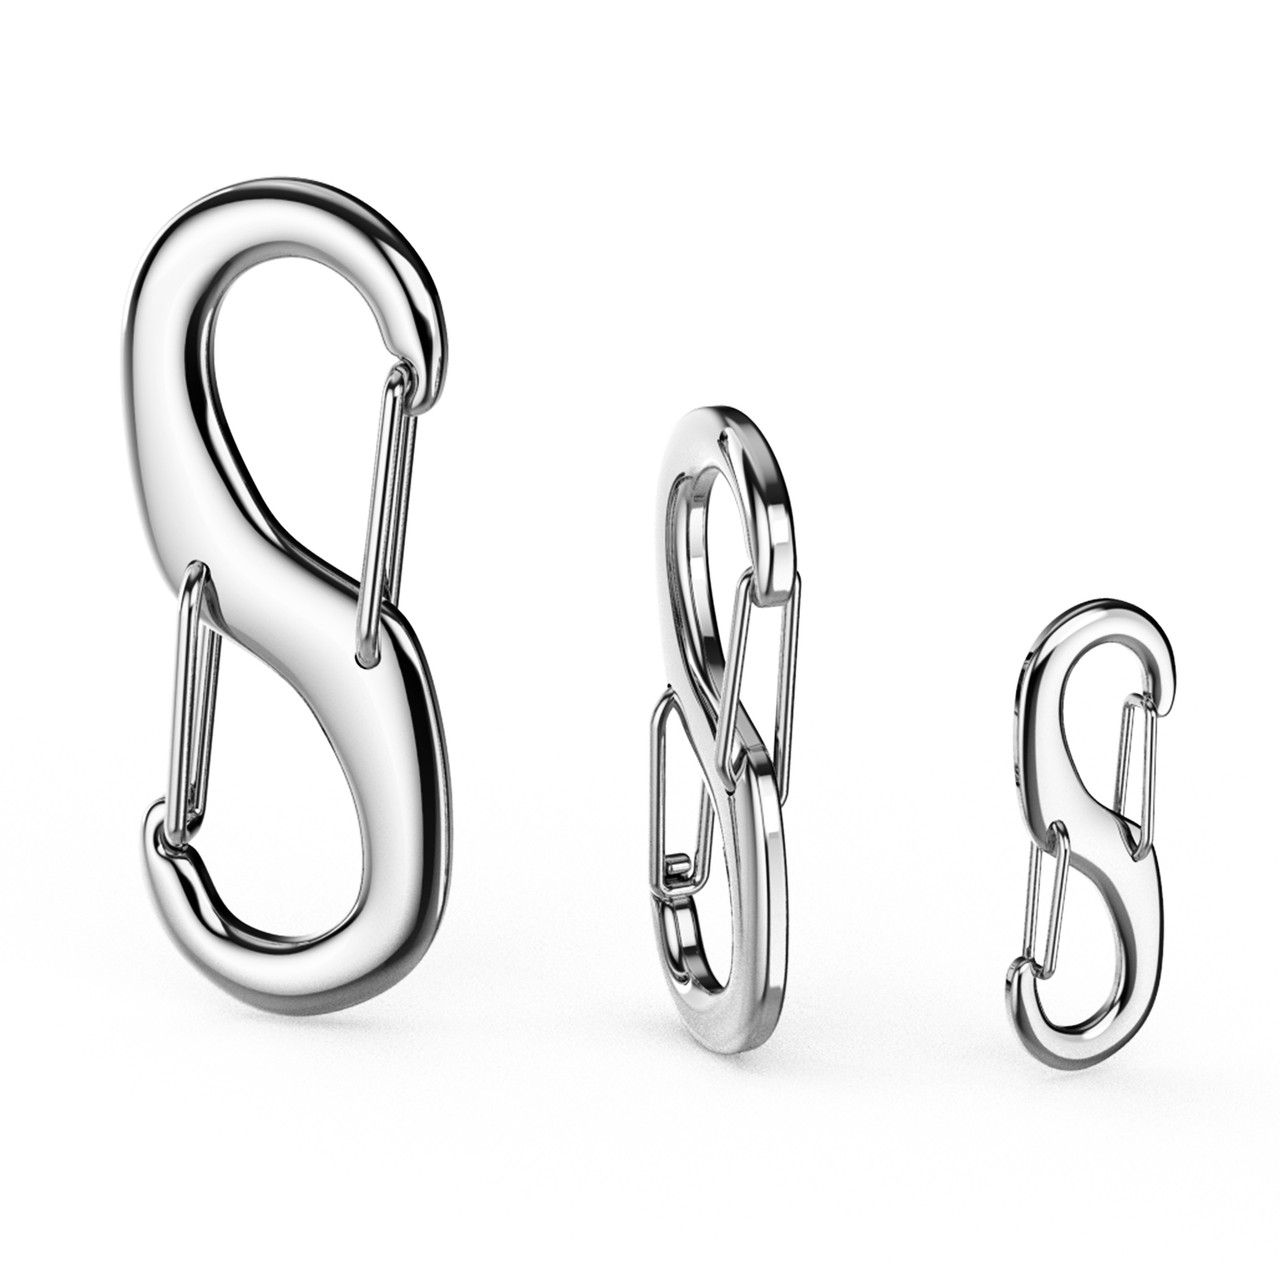 STEEL HAWK Surgical Stainless Steel S/M/L Double Carabiner Clips